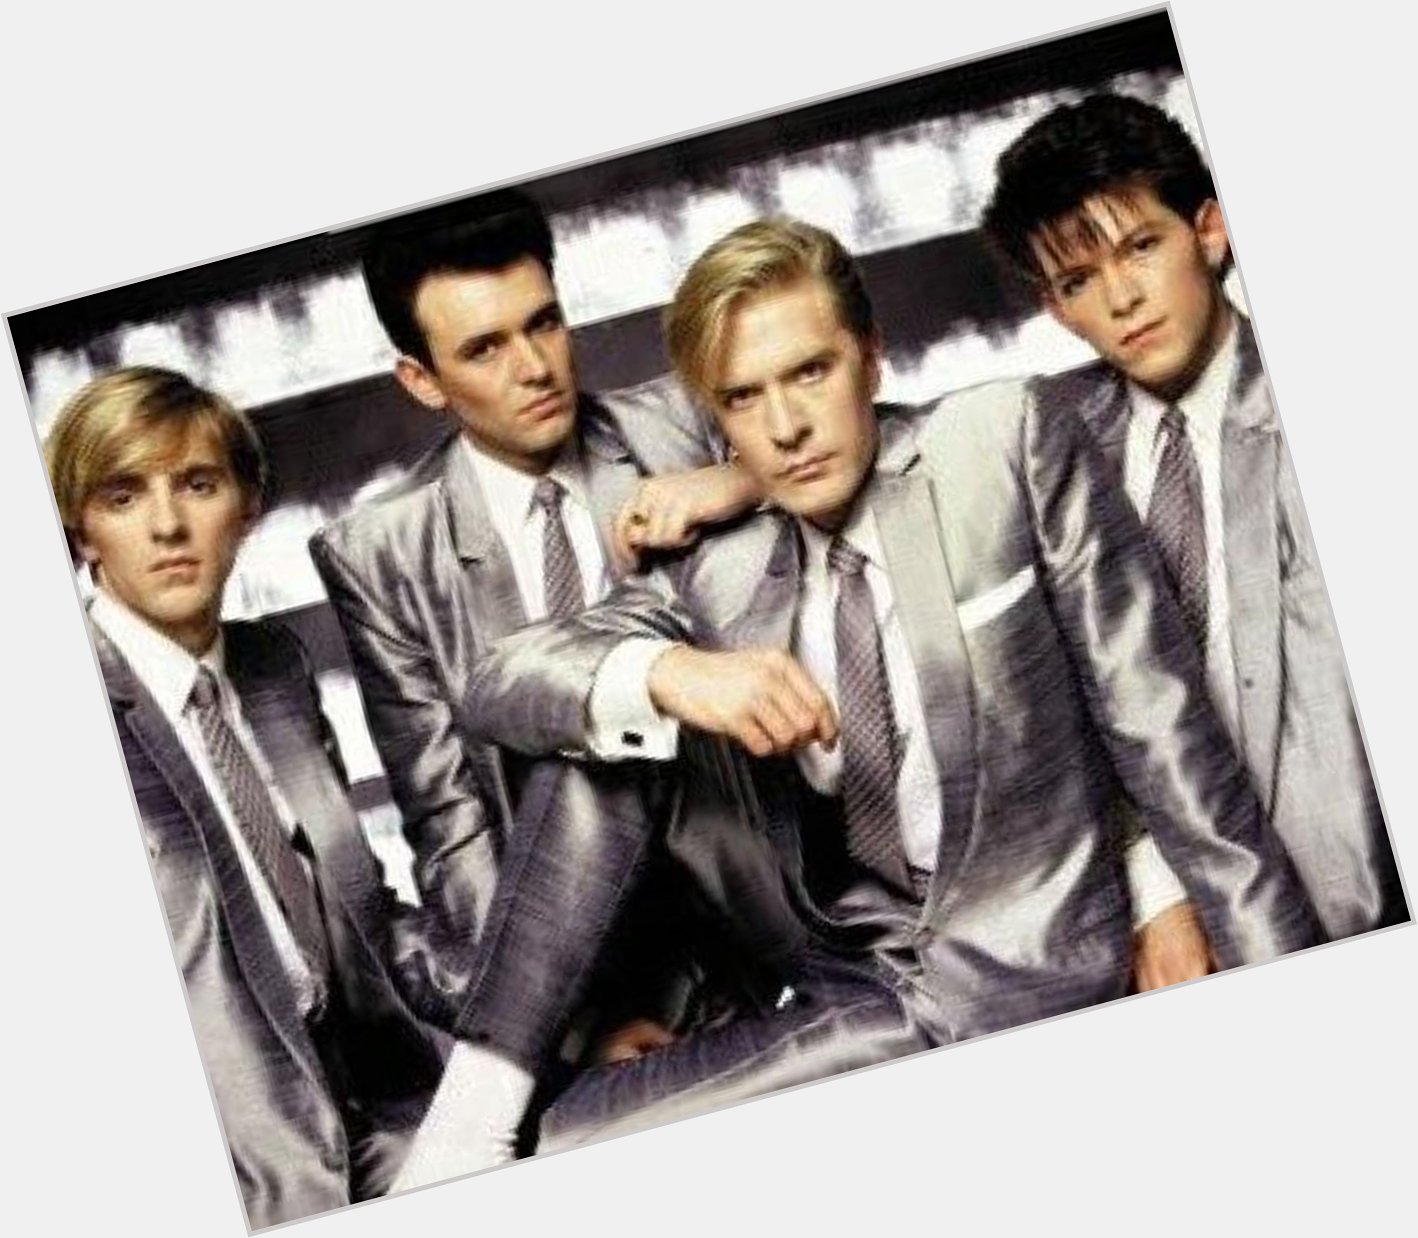 We say Happy Birthday to Martin Fry today lead singer with ABC.  